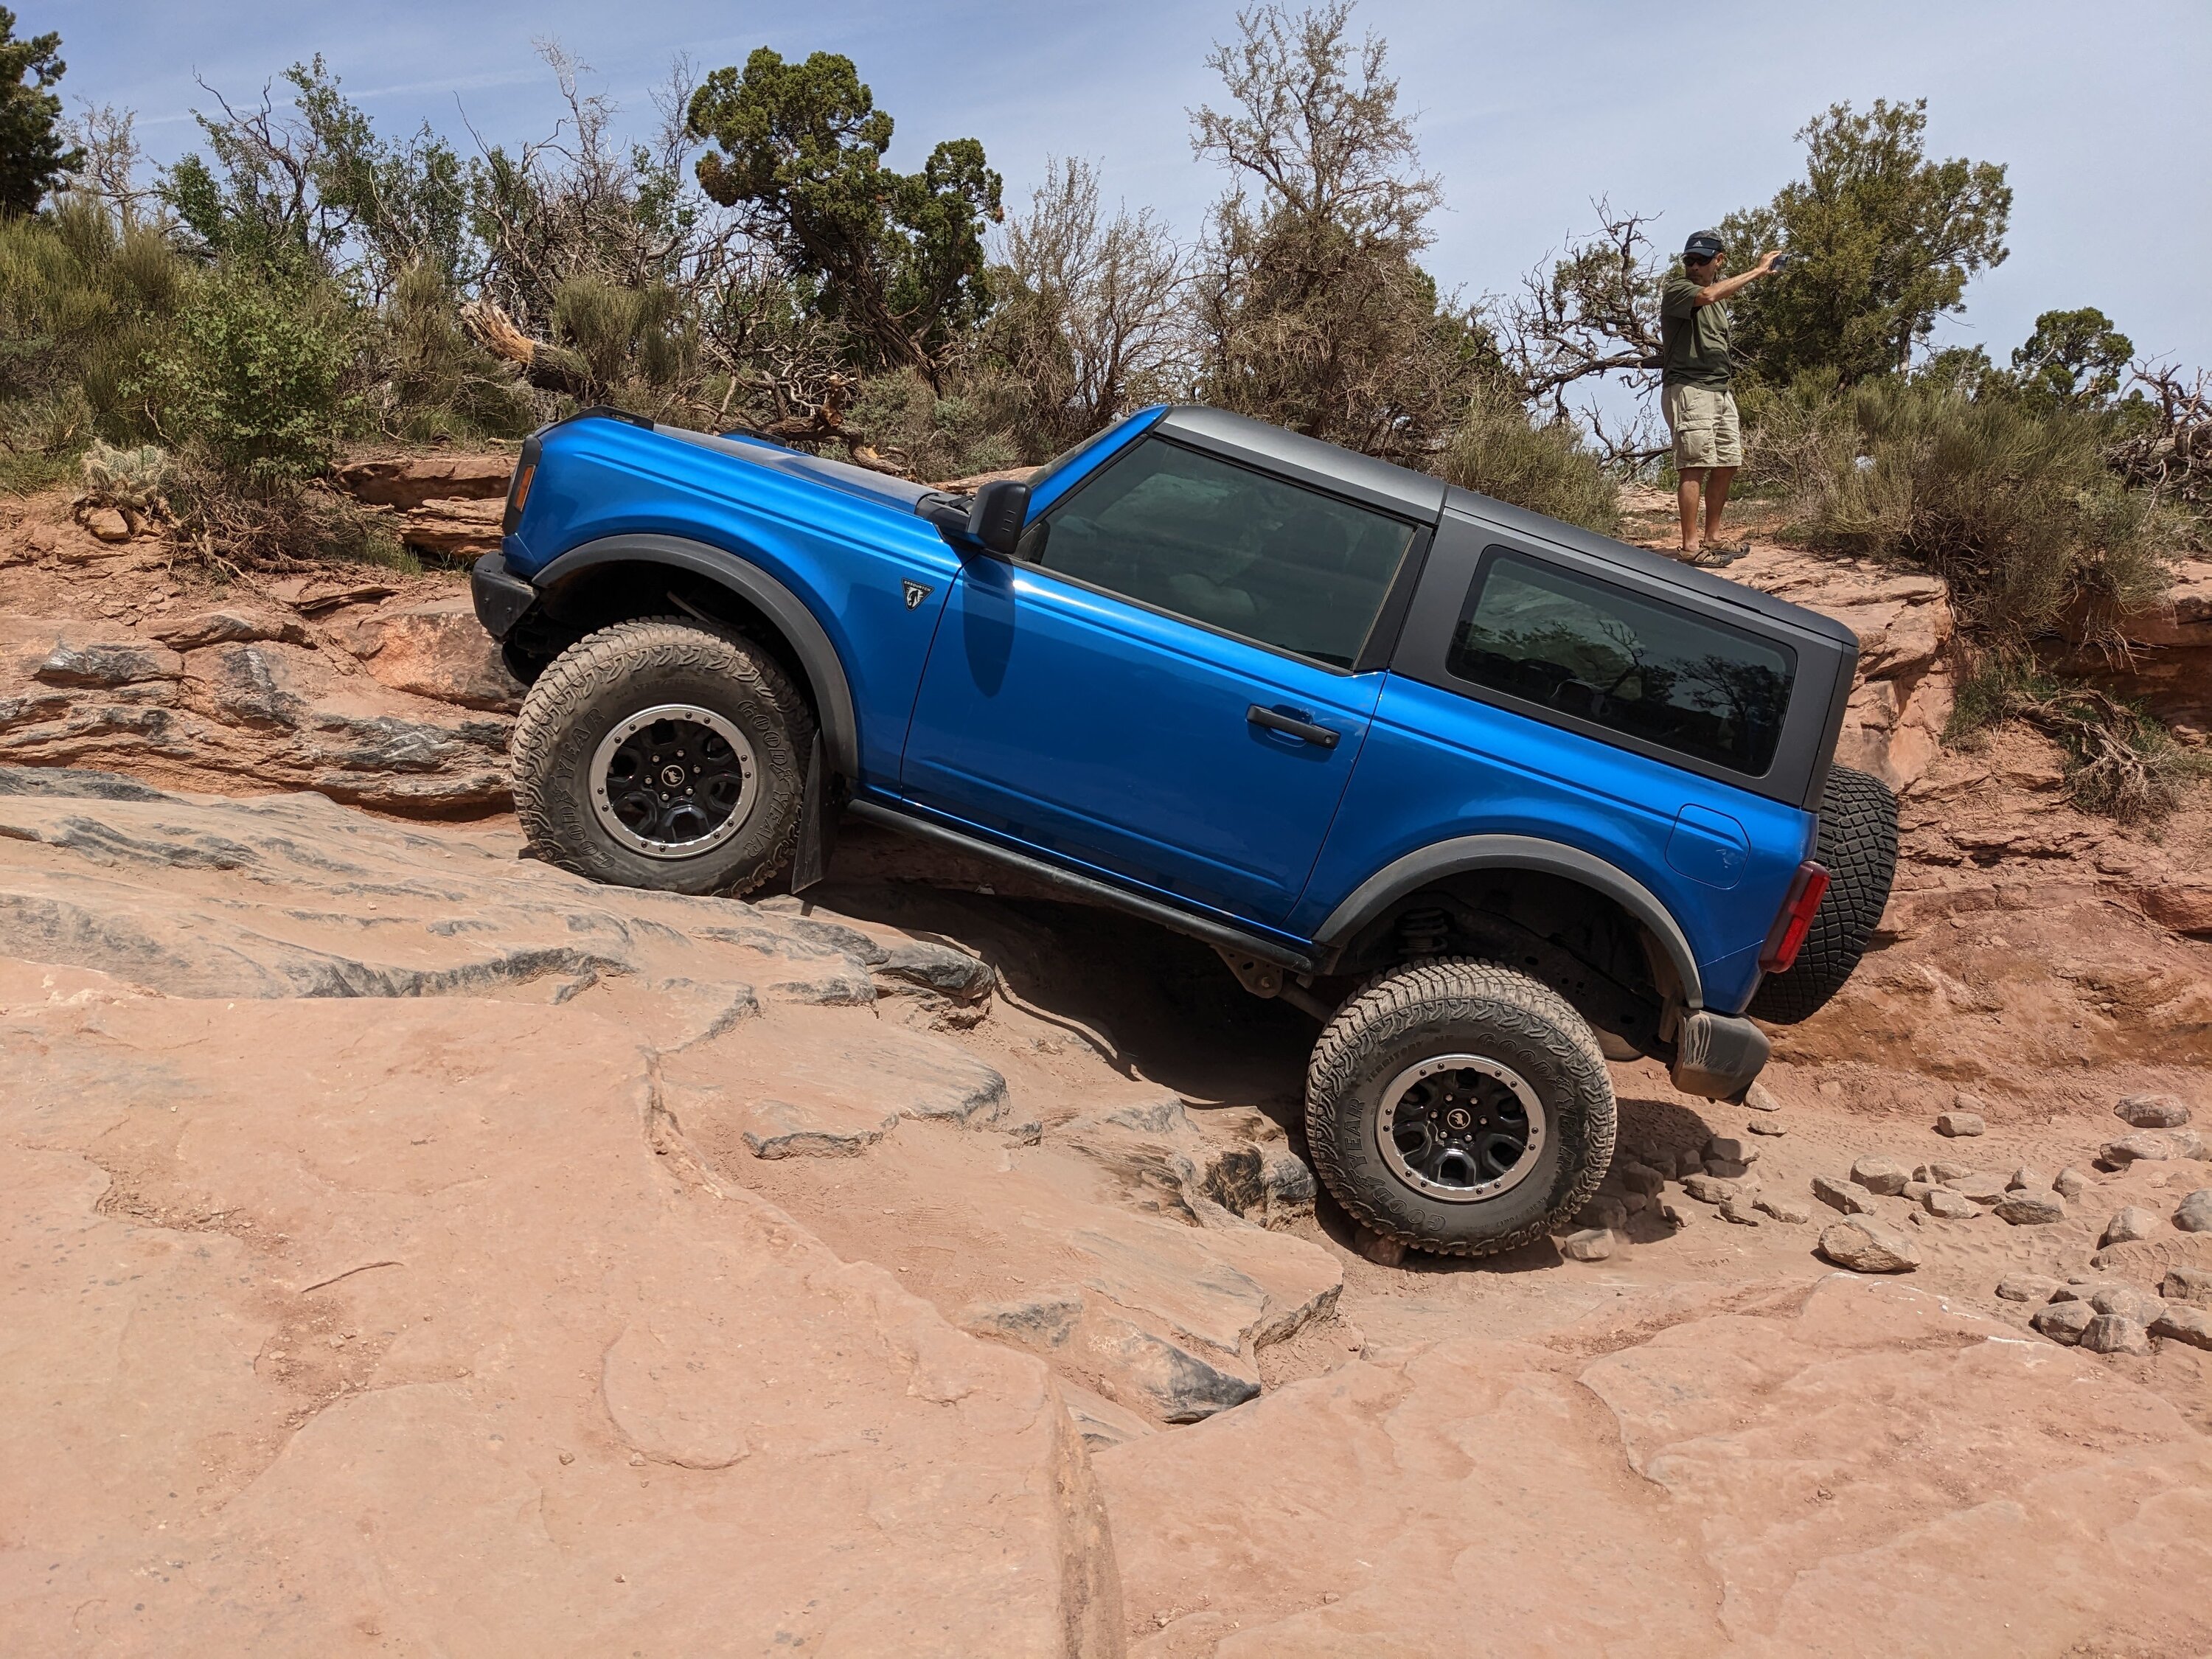 Ford Bronco Moab Bronco Safari 2023 Scheduled For May 2-6 PXL_20230503_172837015